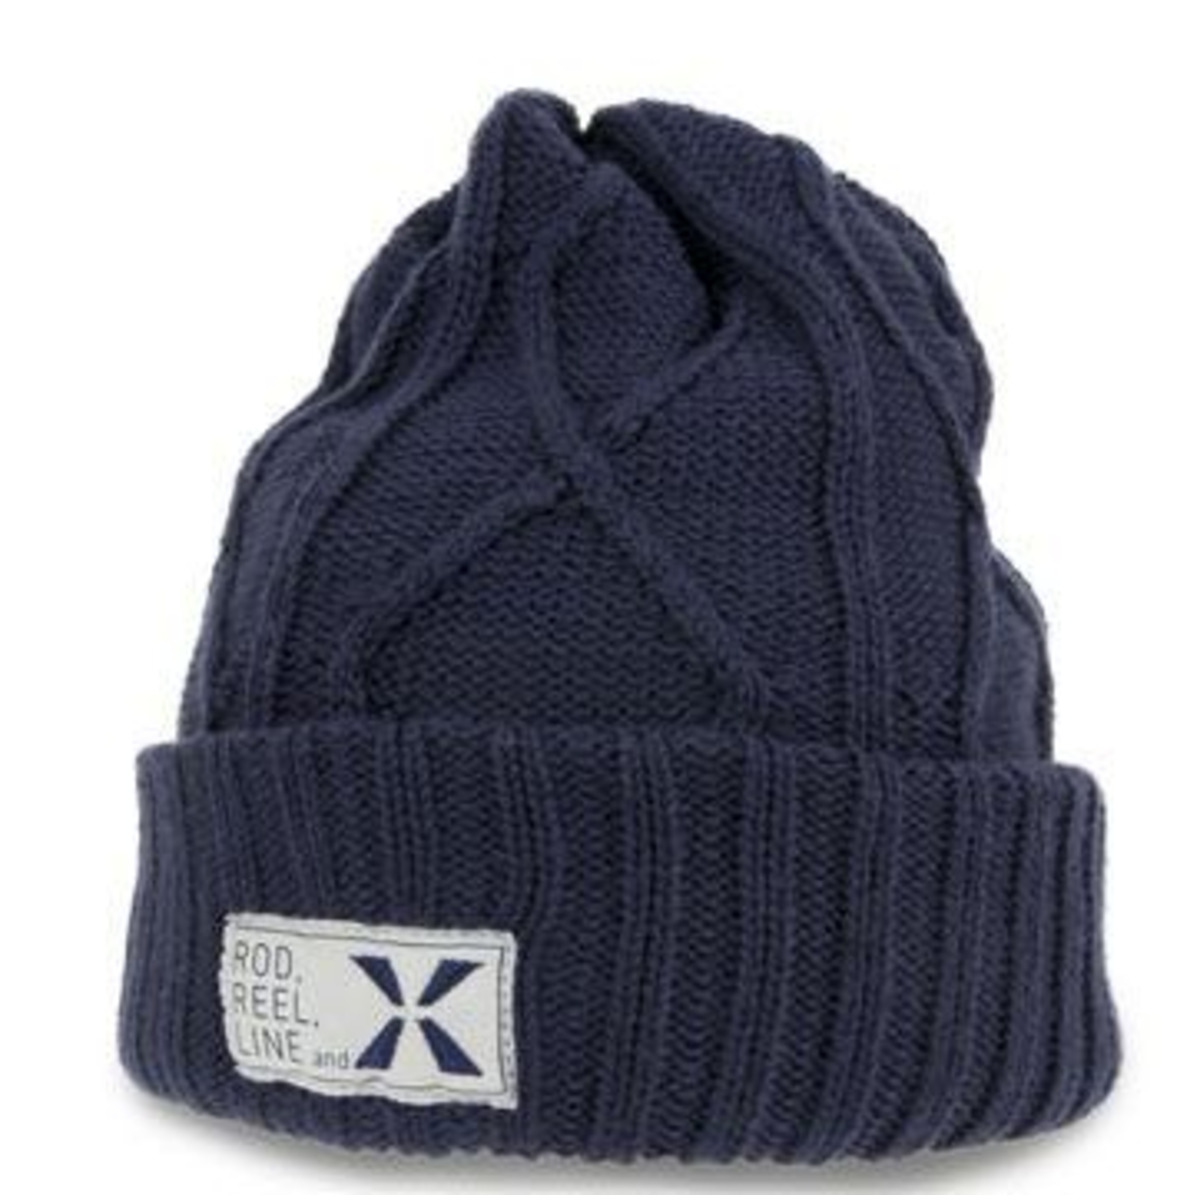 Shimano Cable Knit Xefo Megaheat Cap - Navy